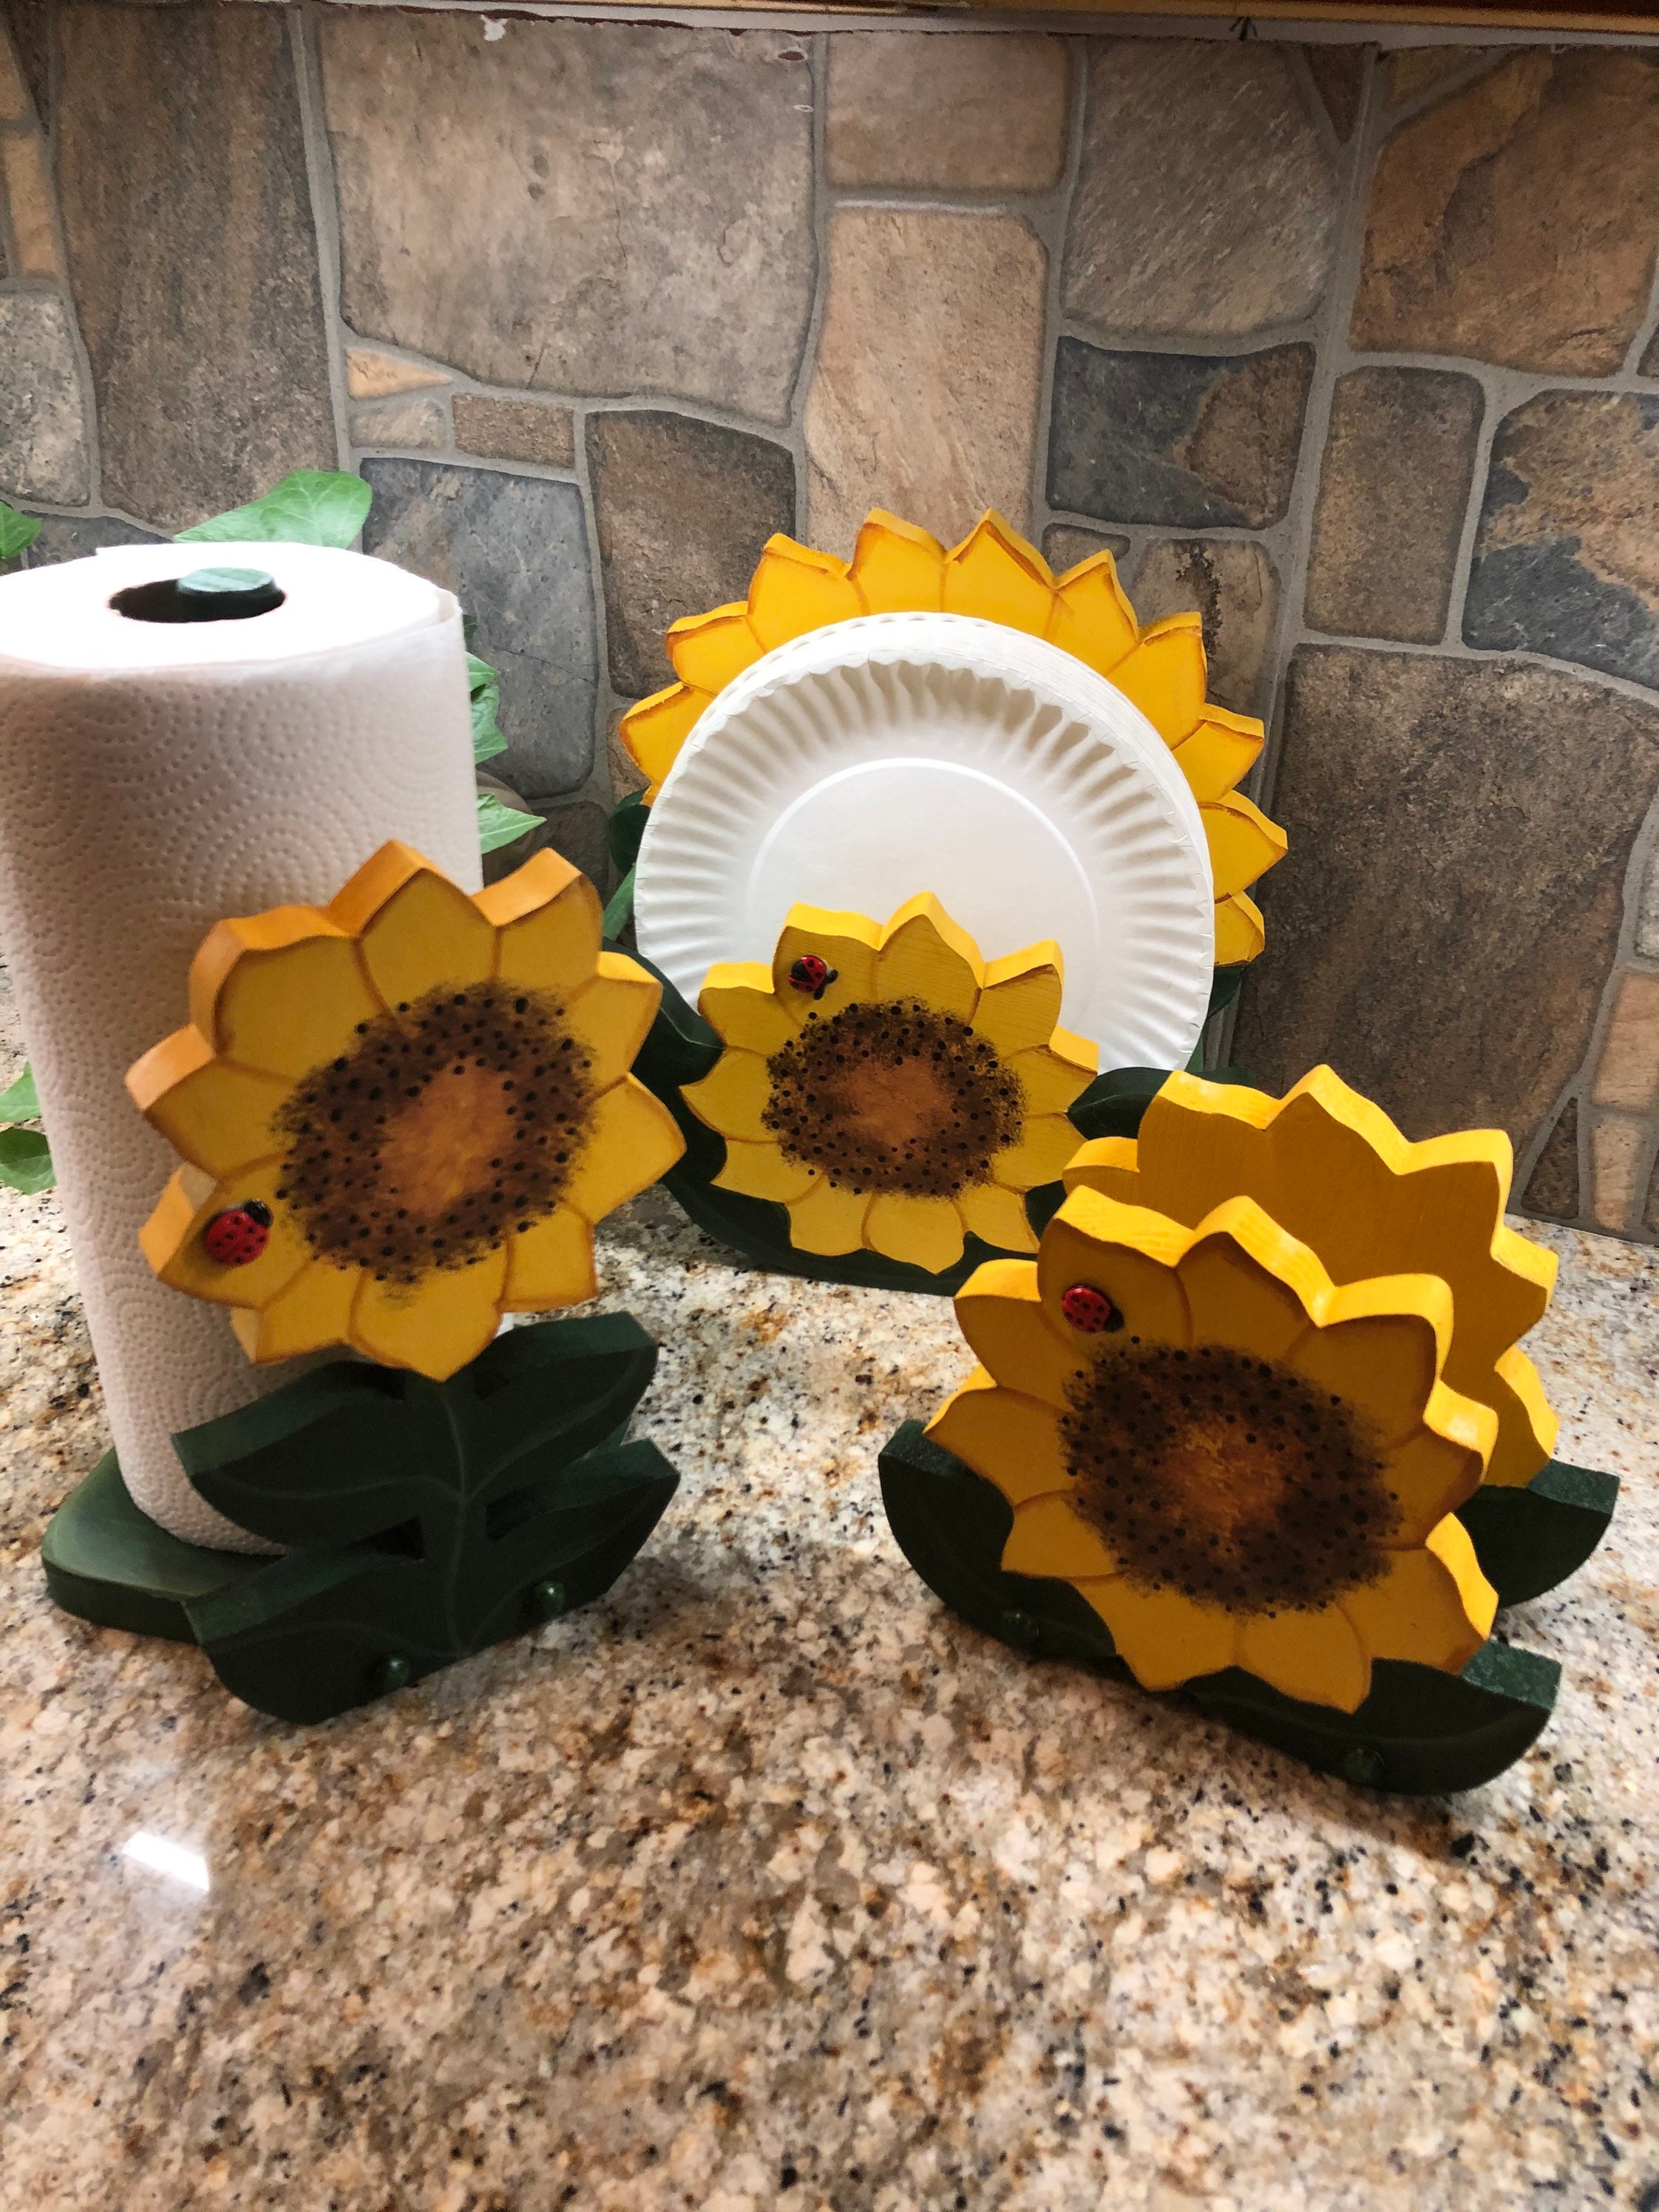 Paper Plate Holder, Wooden Plate Holder, Holder for Plates, Sunflower  Decor, Sunflowers, Sunflower Kitchen, Country Decor, Hand painted